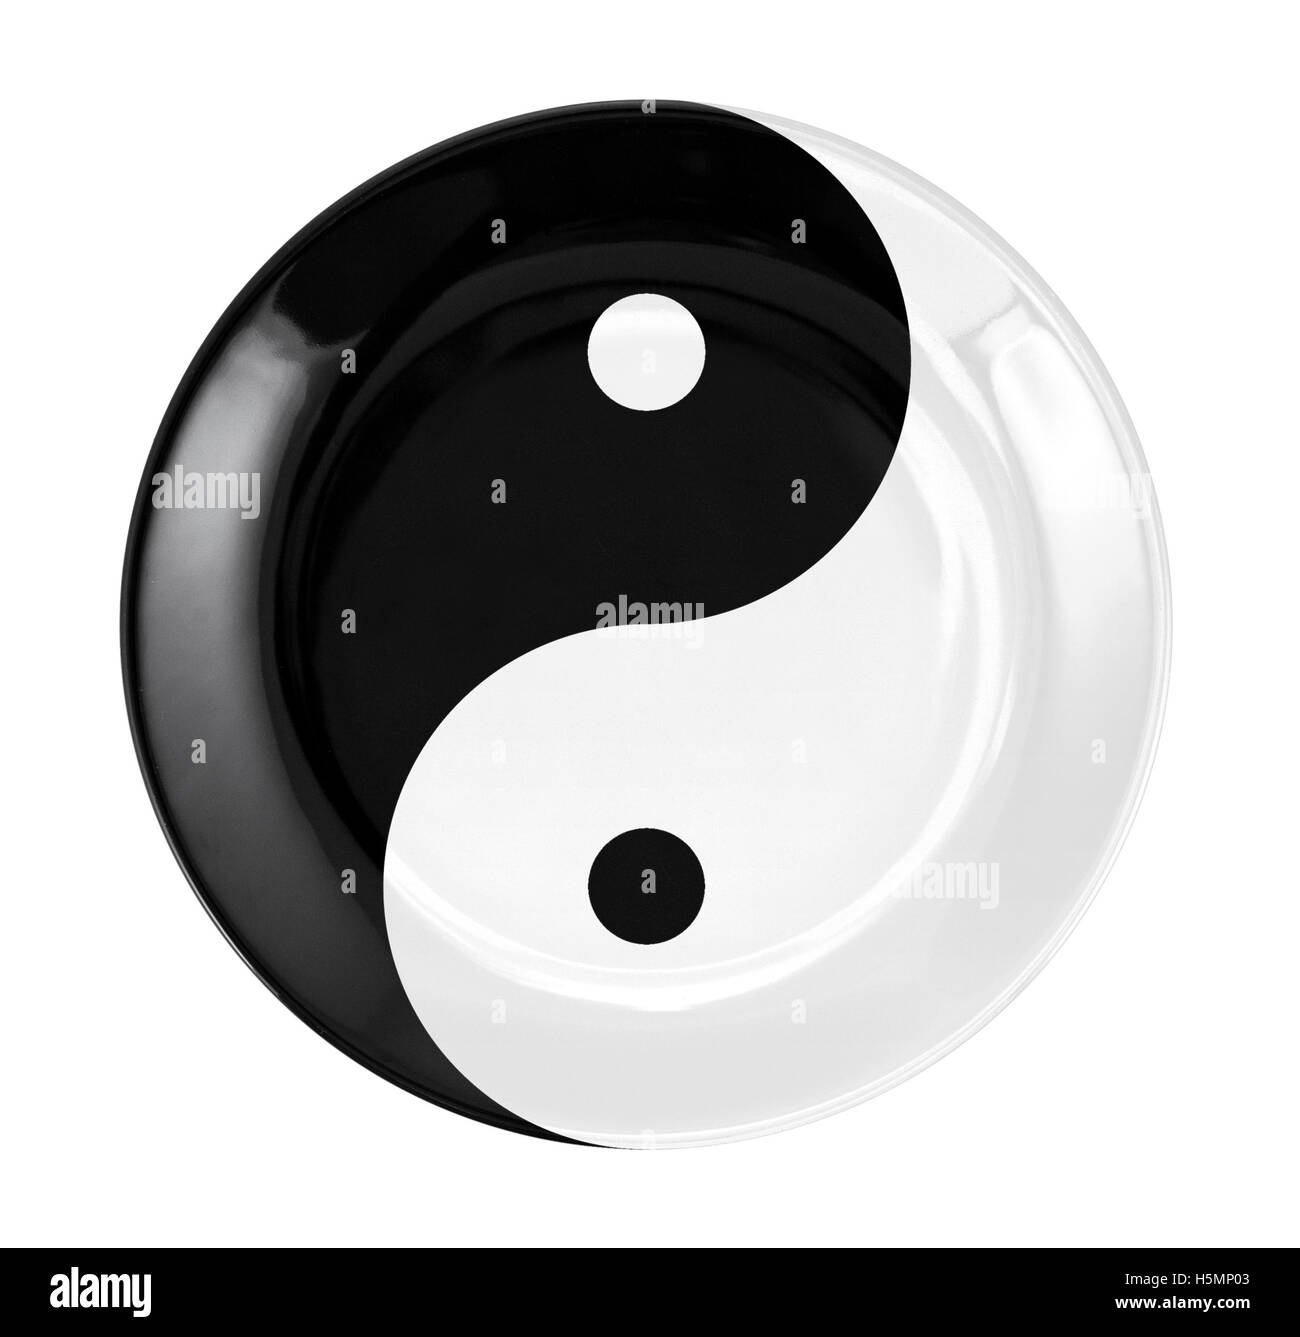 plate with yin yang symbol on white background. concept plate for Japanese and Chinese food. Stock Photo